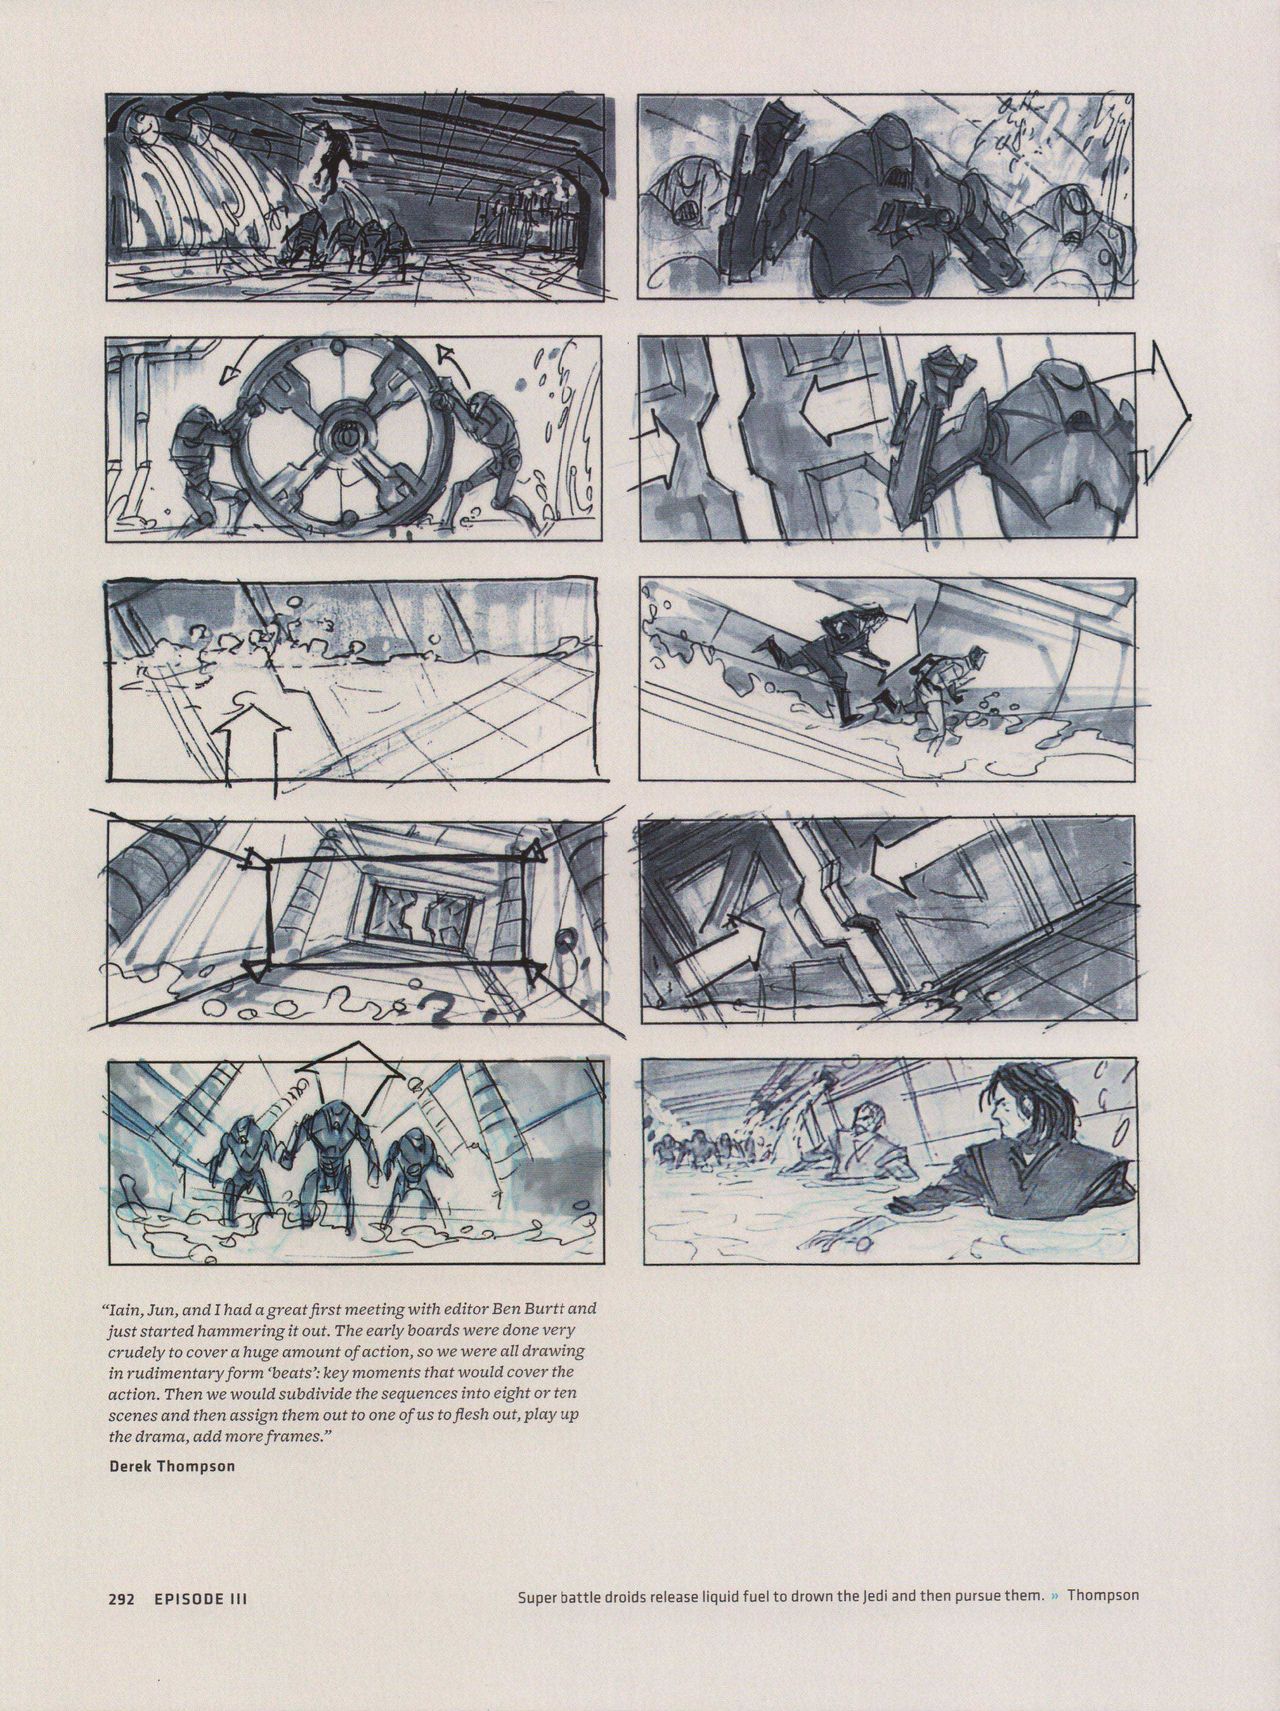 Star Wars Storyboards - The Prequel Trilogy 296